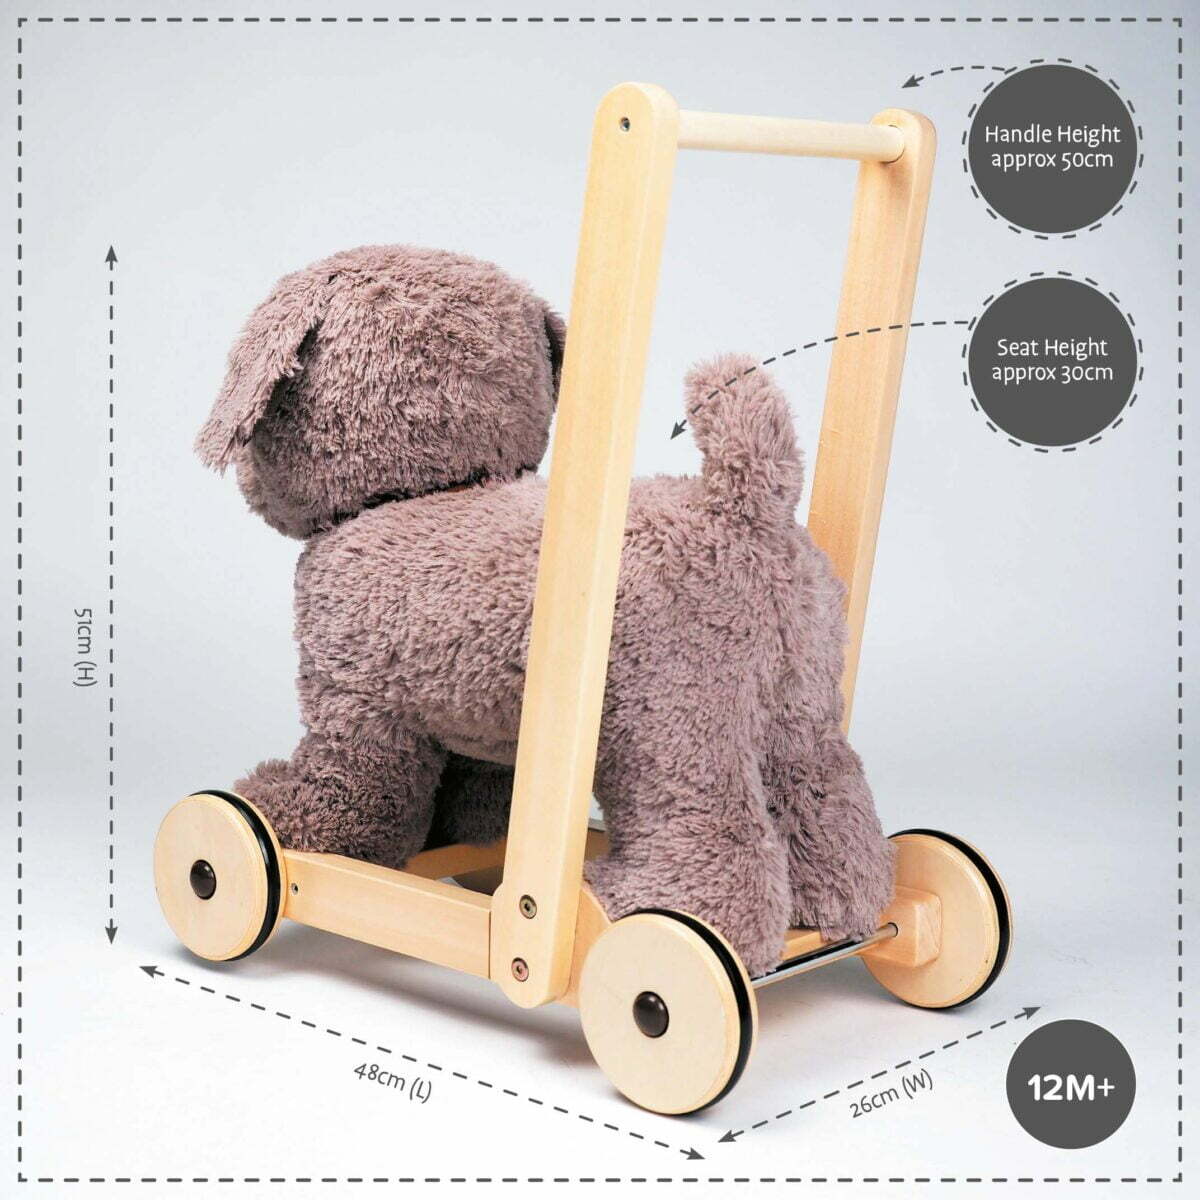 Product dimensions displayed for Bailey Dog Baby Walker